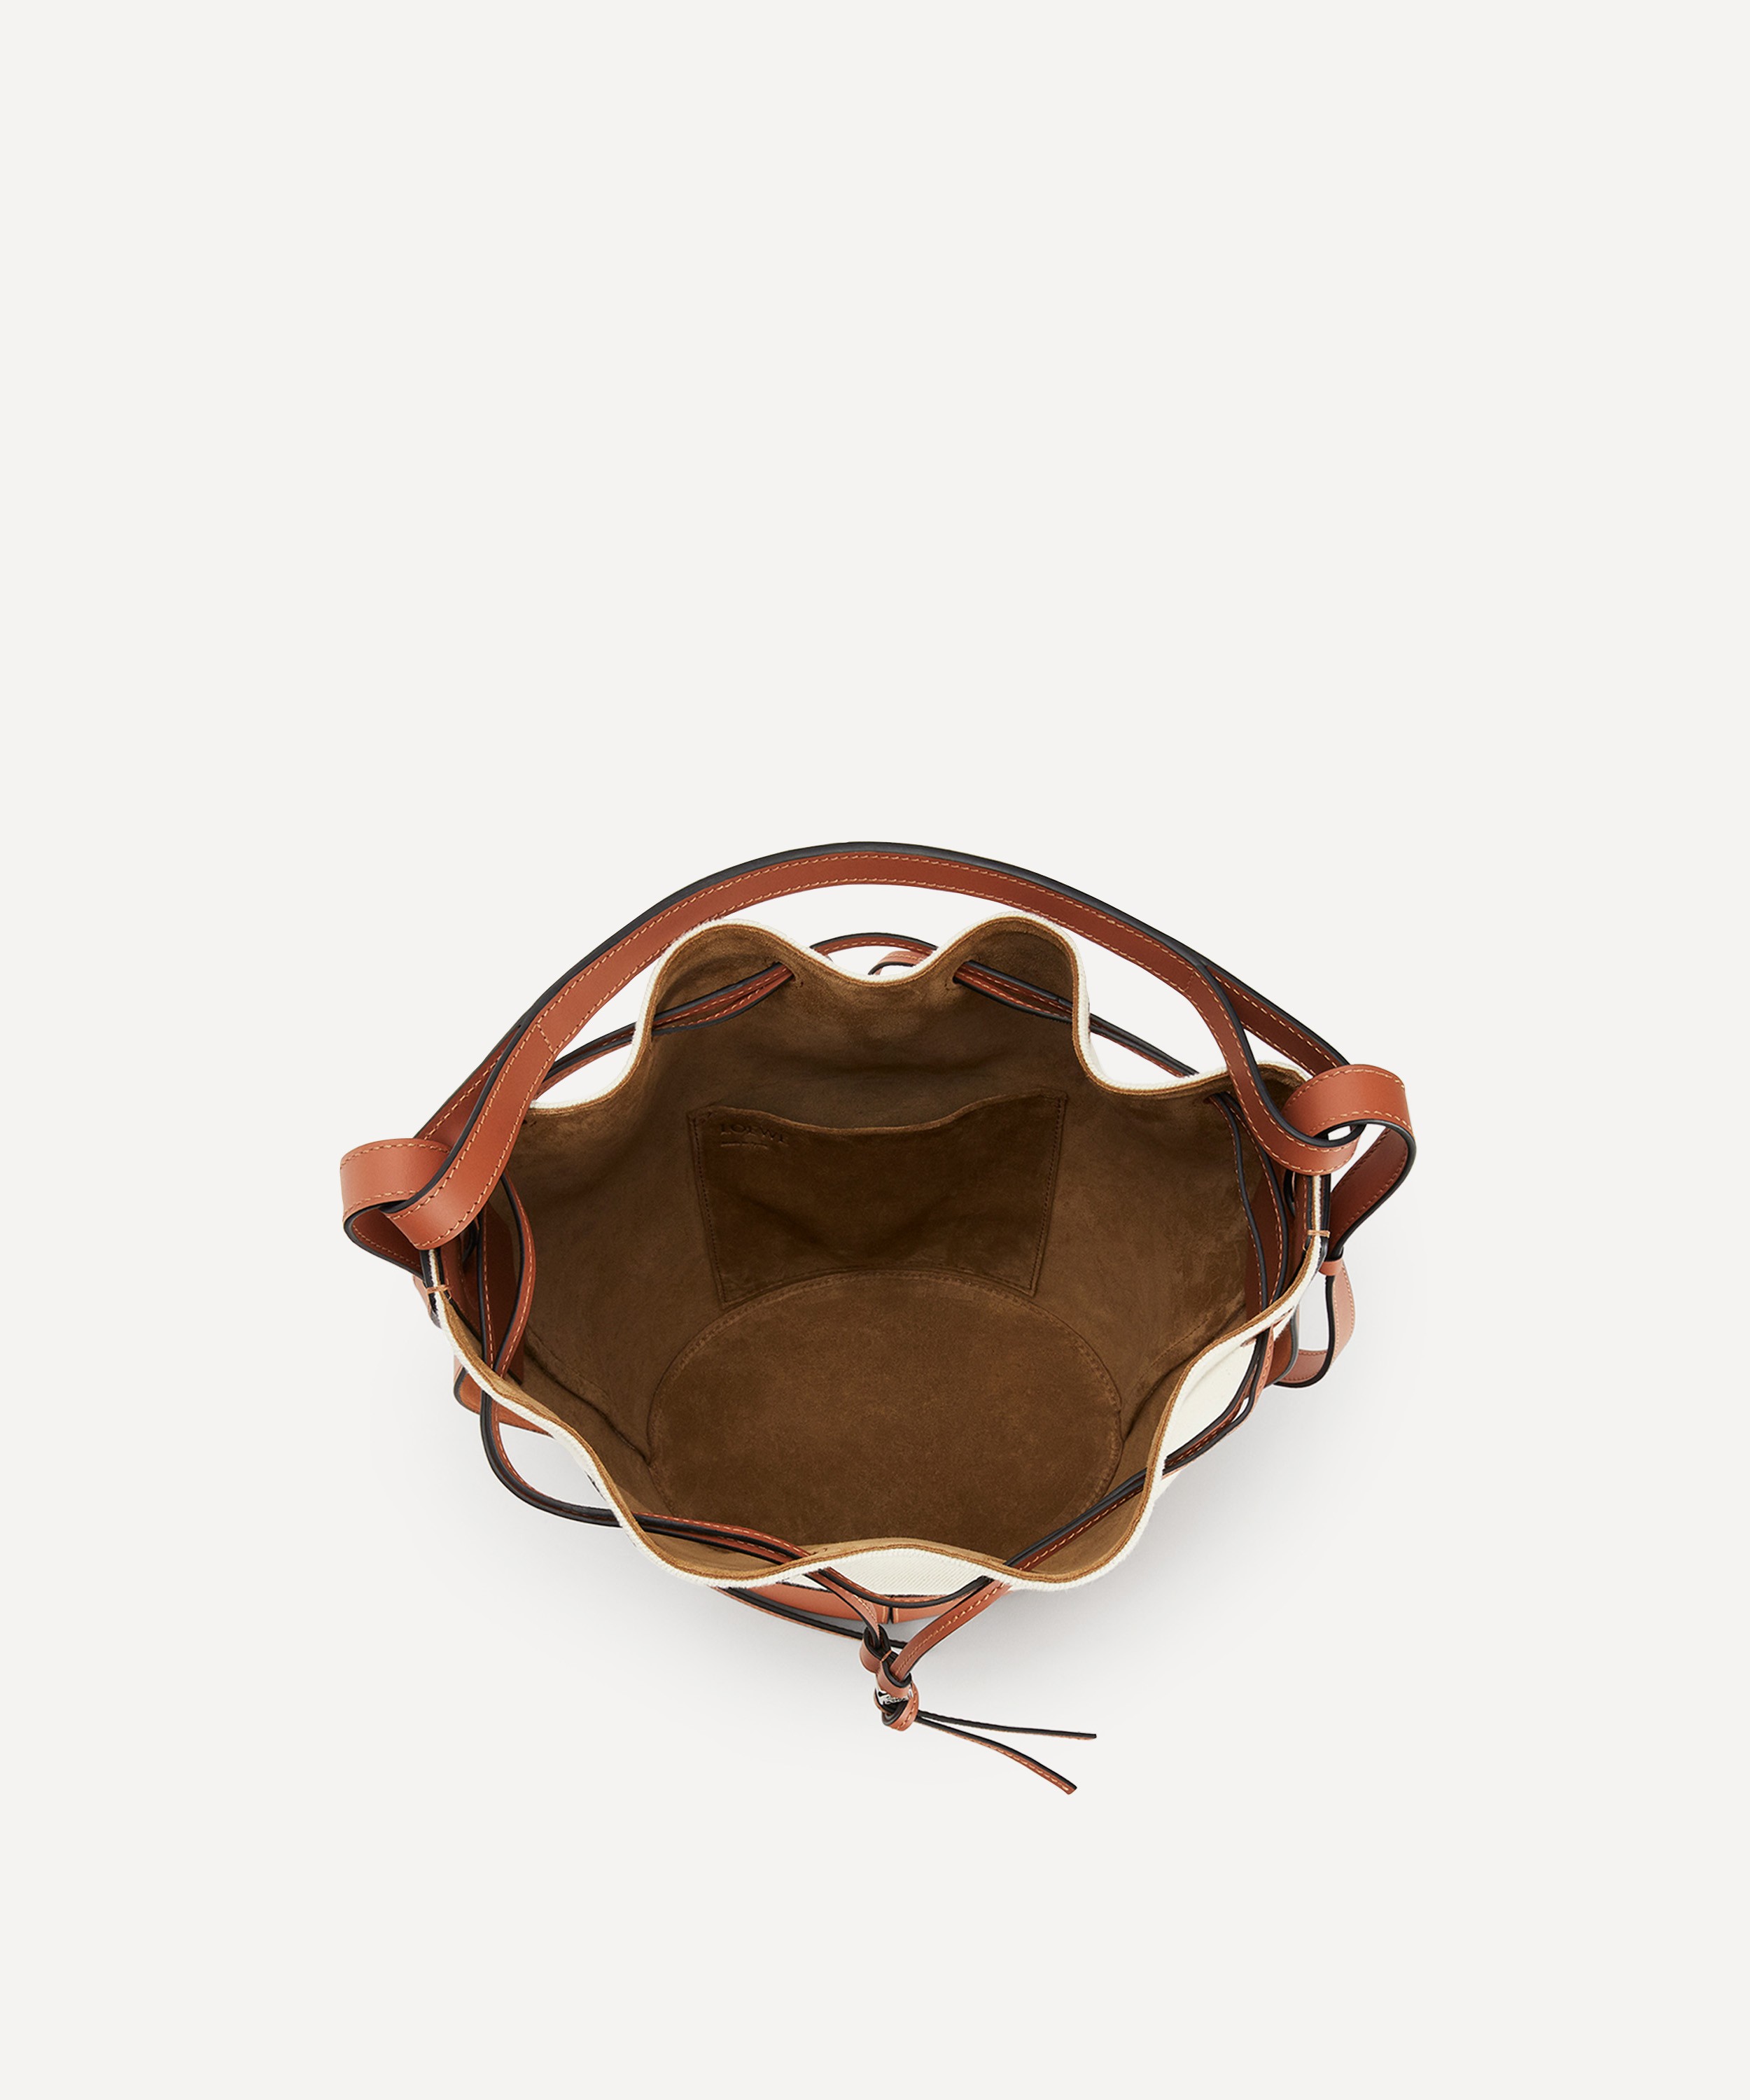 LOEWE - Balloon bag crafted in canvas and leather. loewe.cm